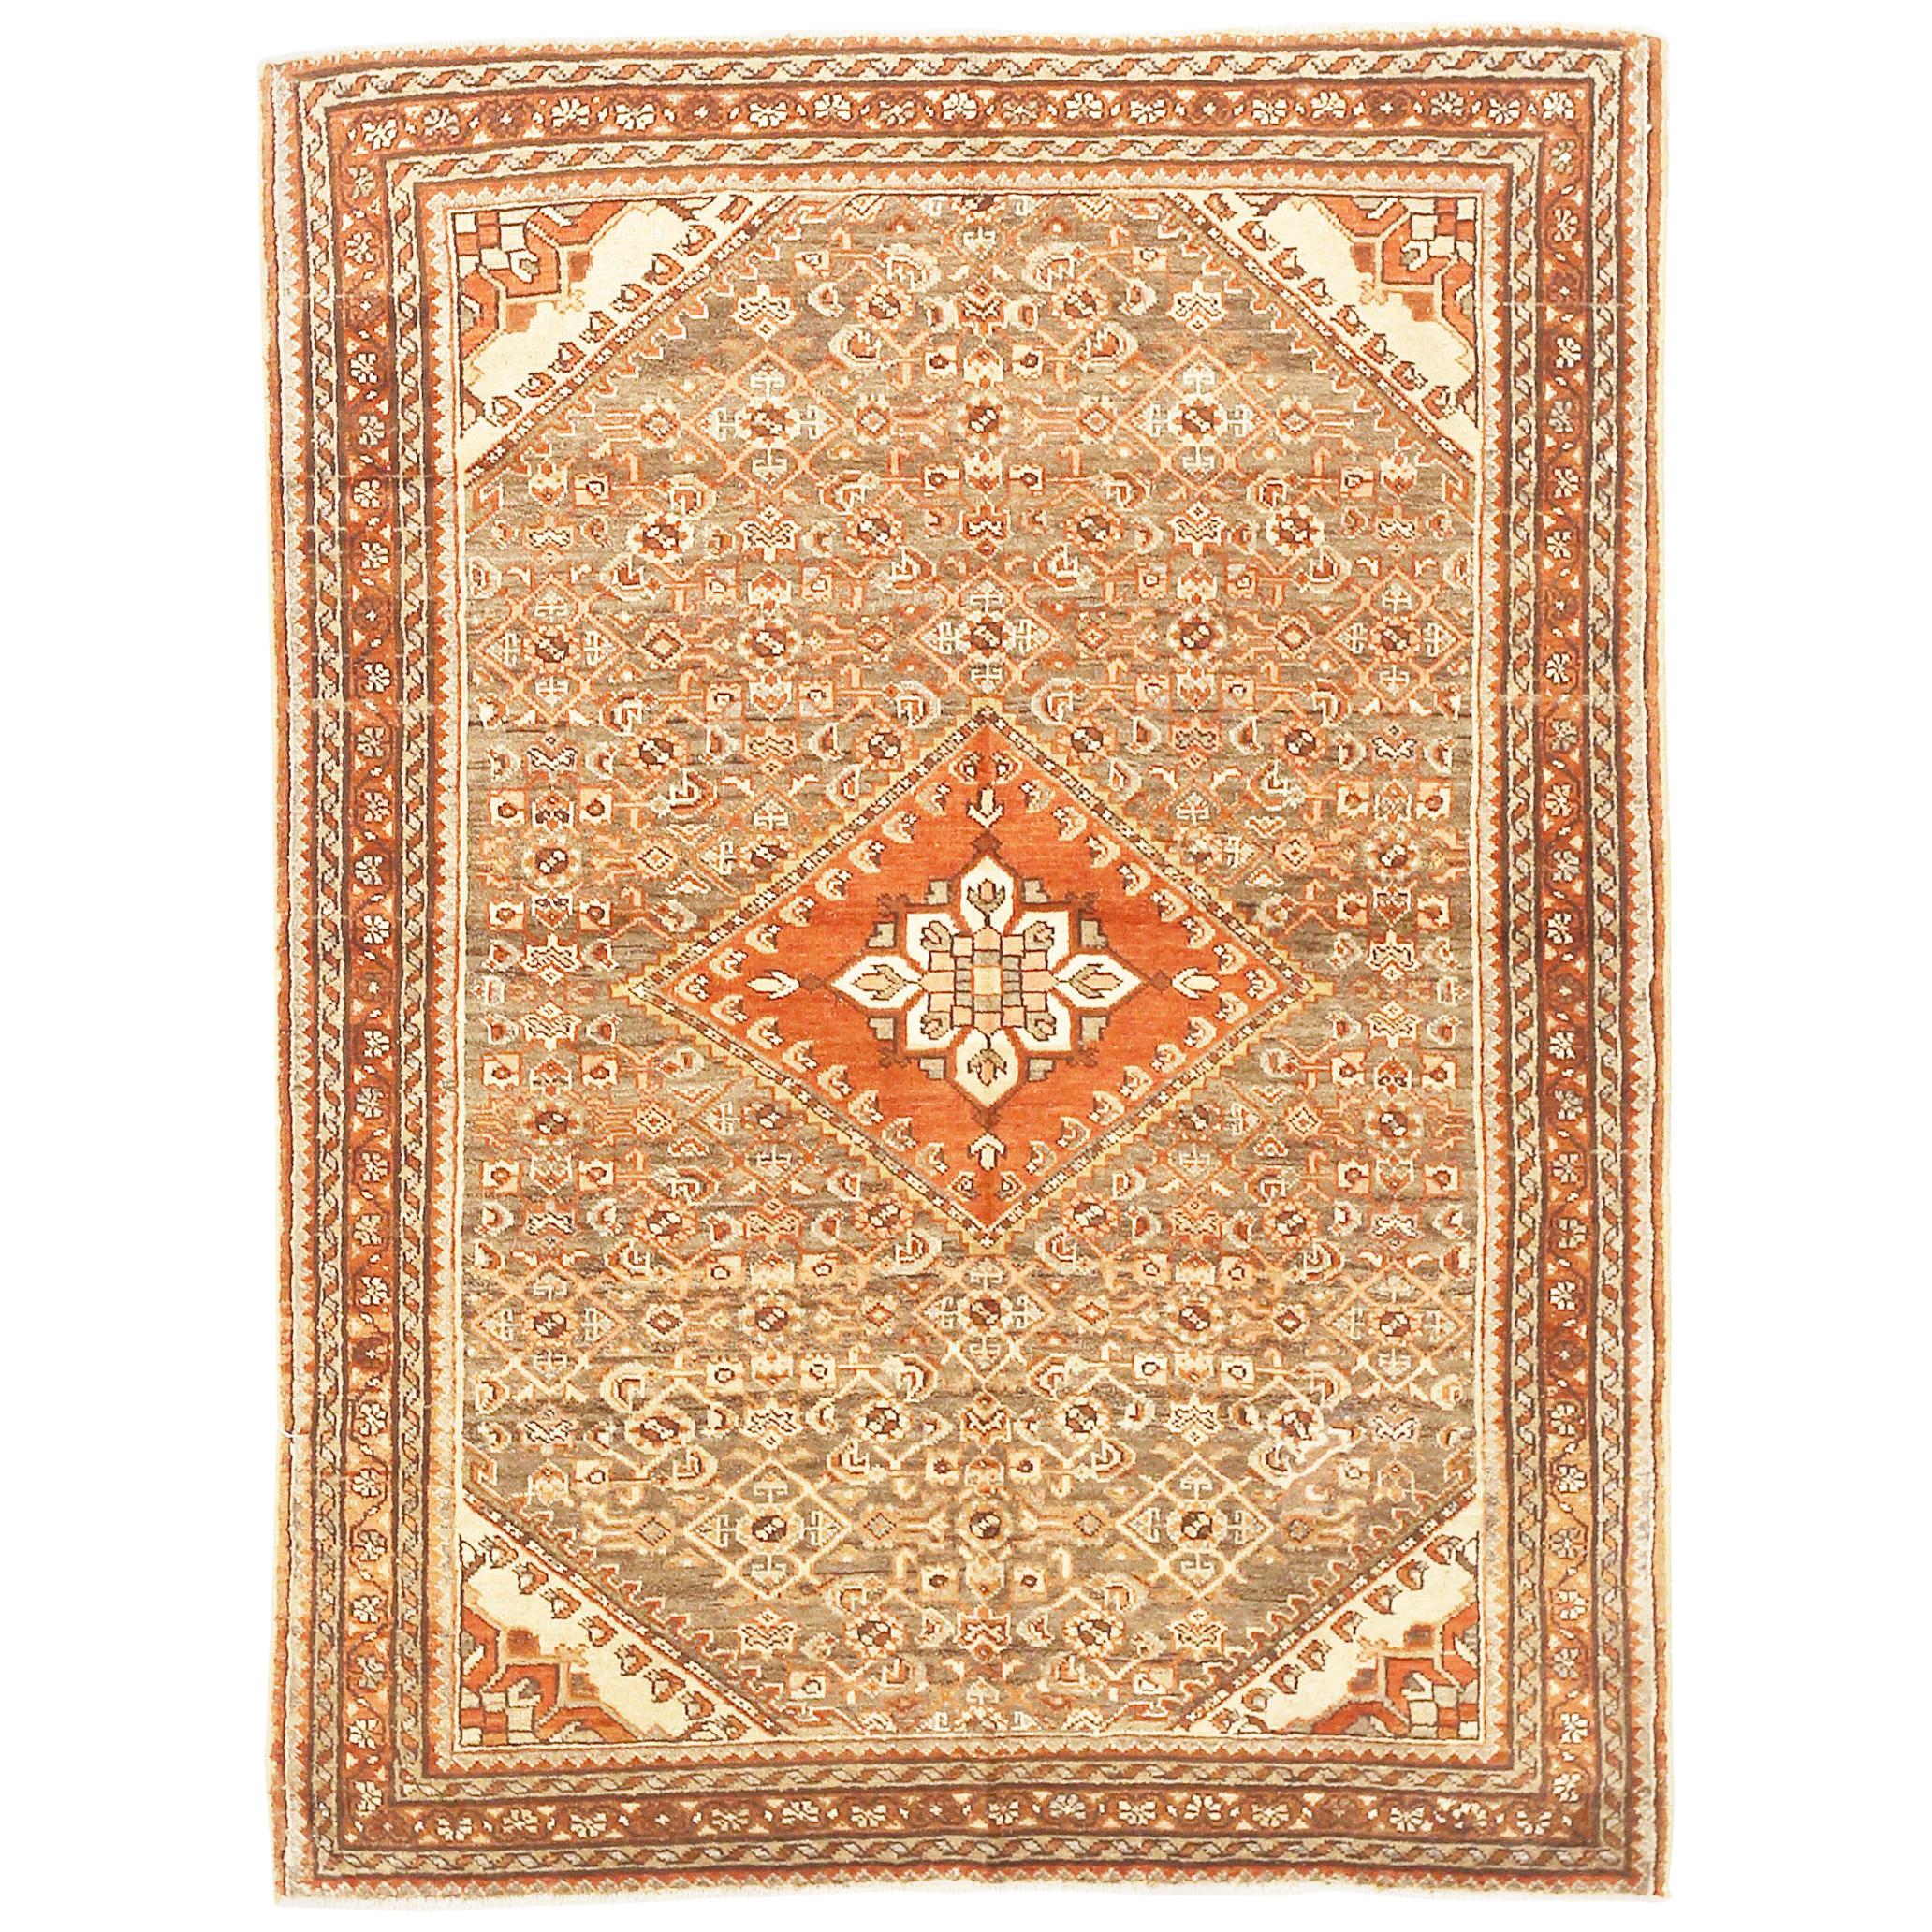 Antique Persian Borchalo Rug with Brown & White Diamond Central Medallion